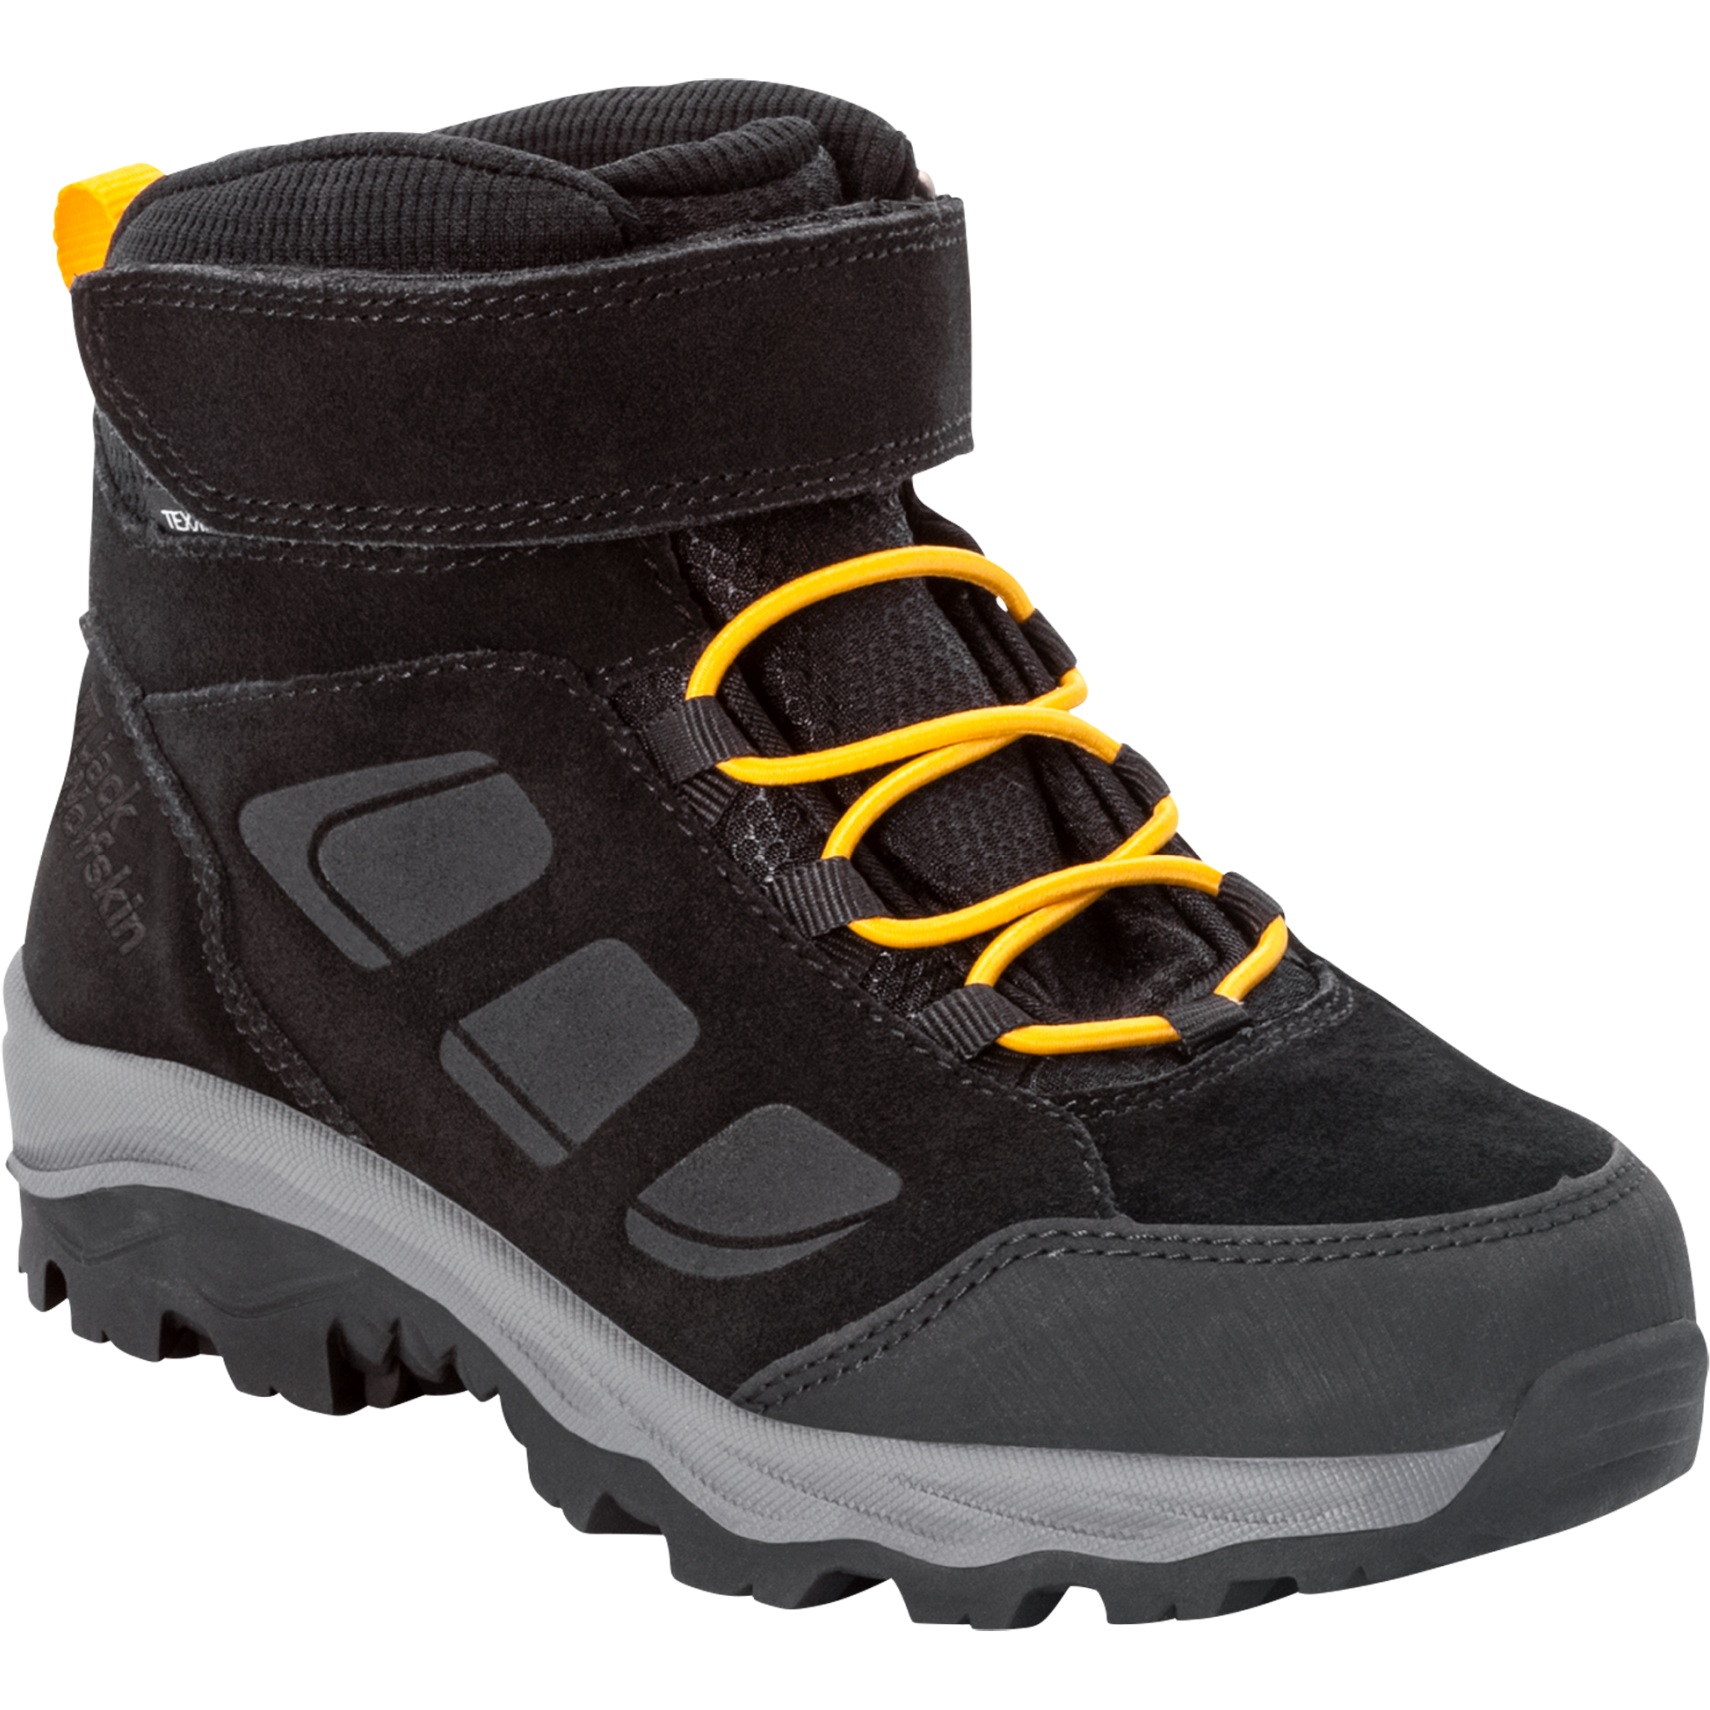 Picture of Jack Wolfskin Vojo LT Texapore Mid Hiking Boots Kids - black / burly yellow XT